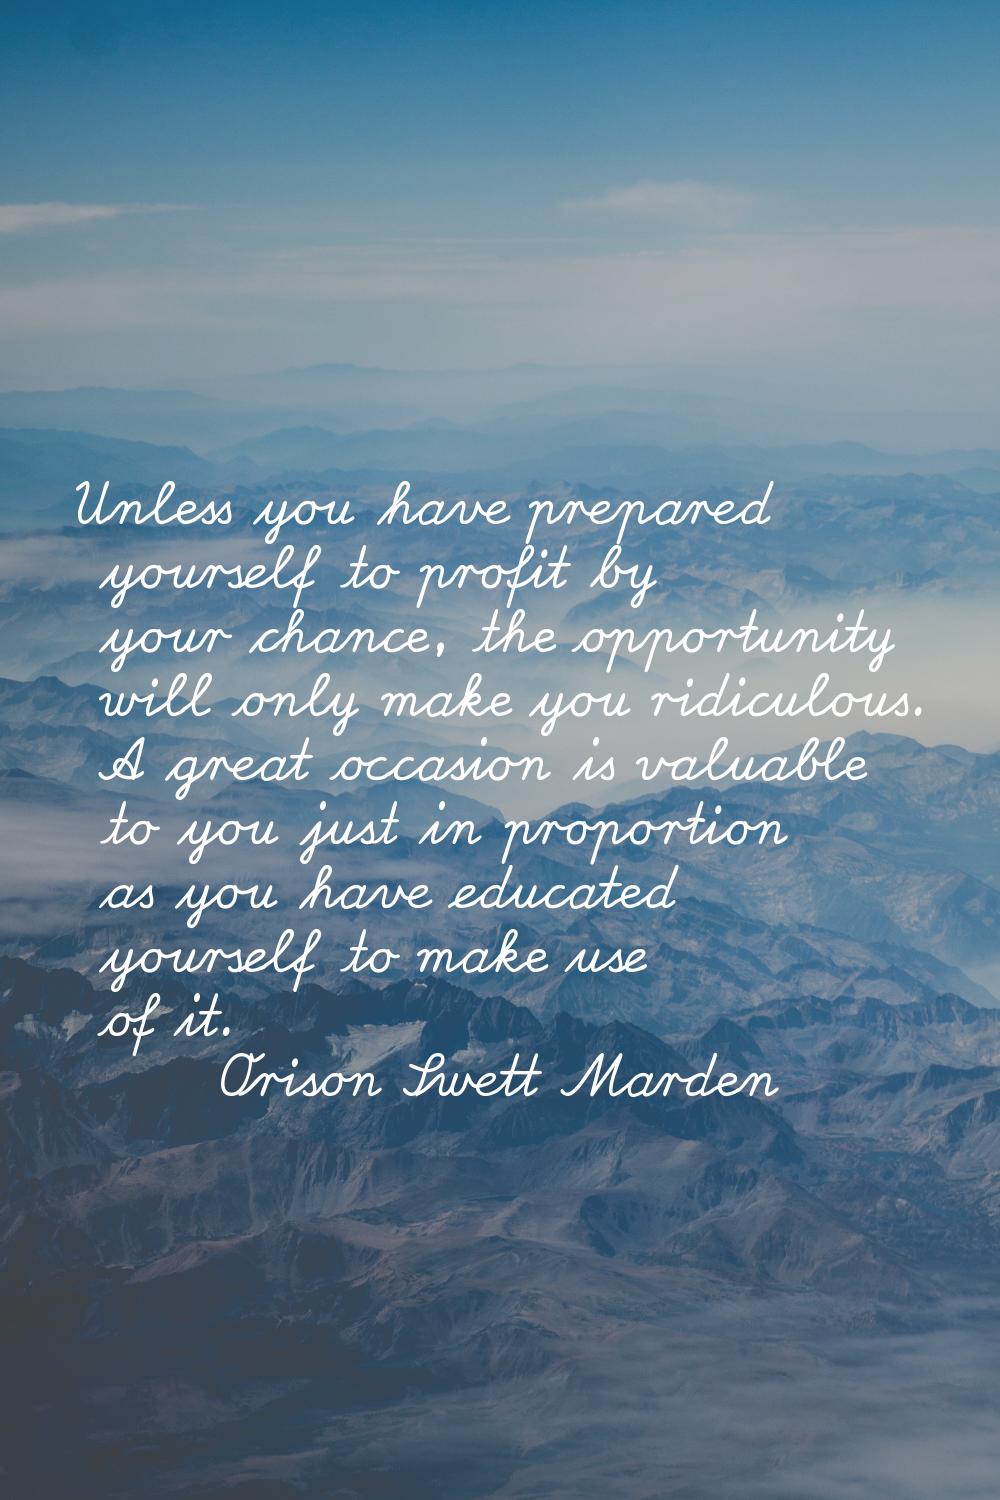 Unless you have prepared yourself to profit by your chance, the opportunity will only make you ridi